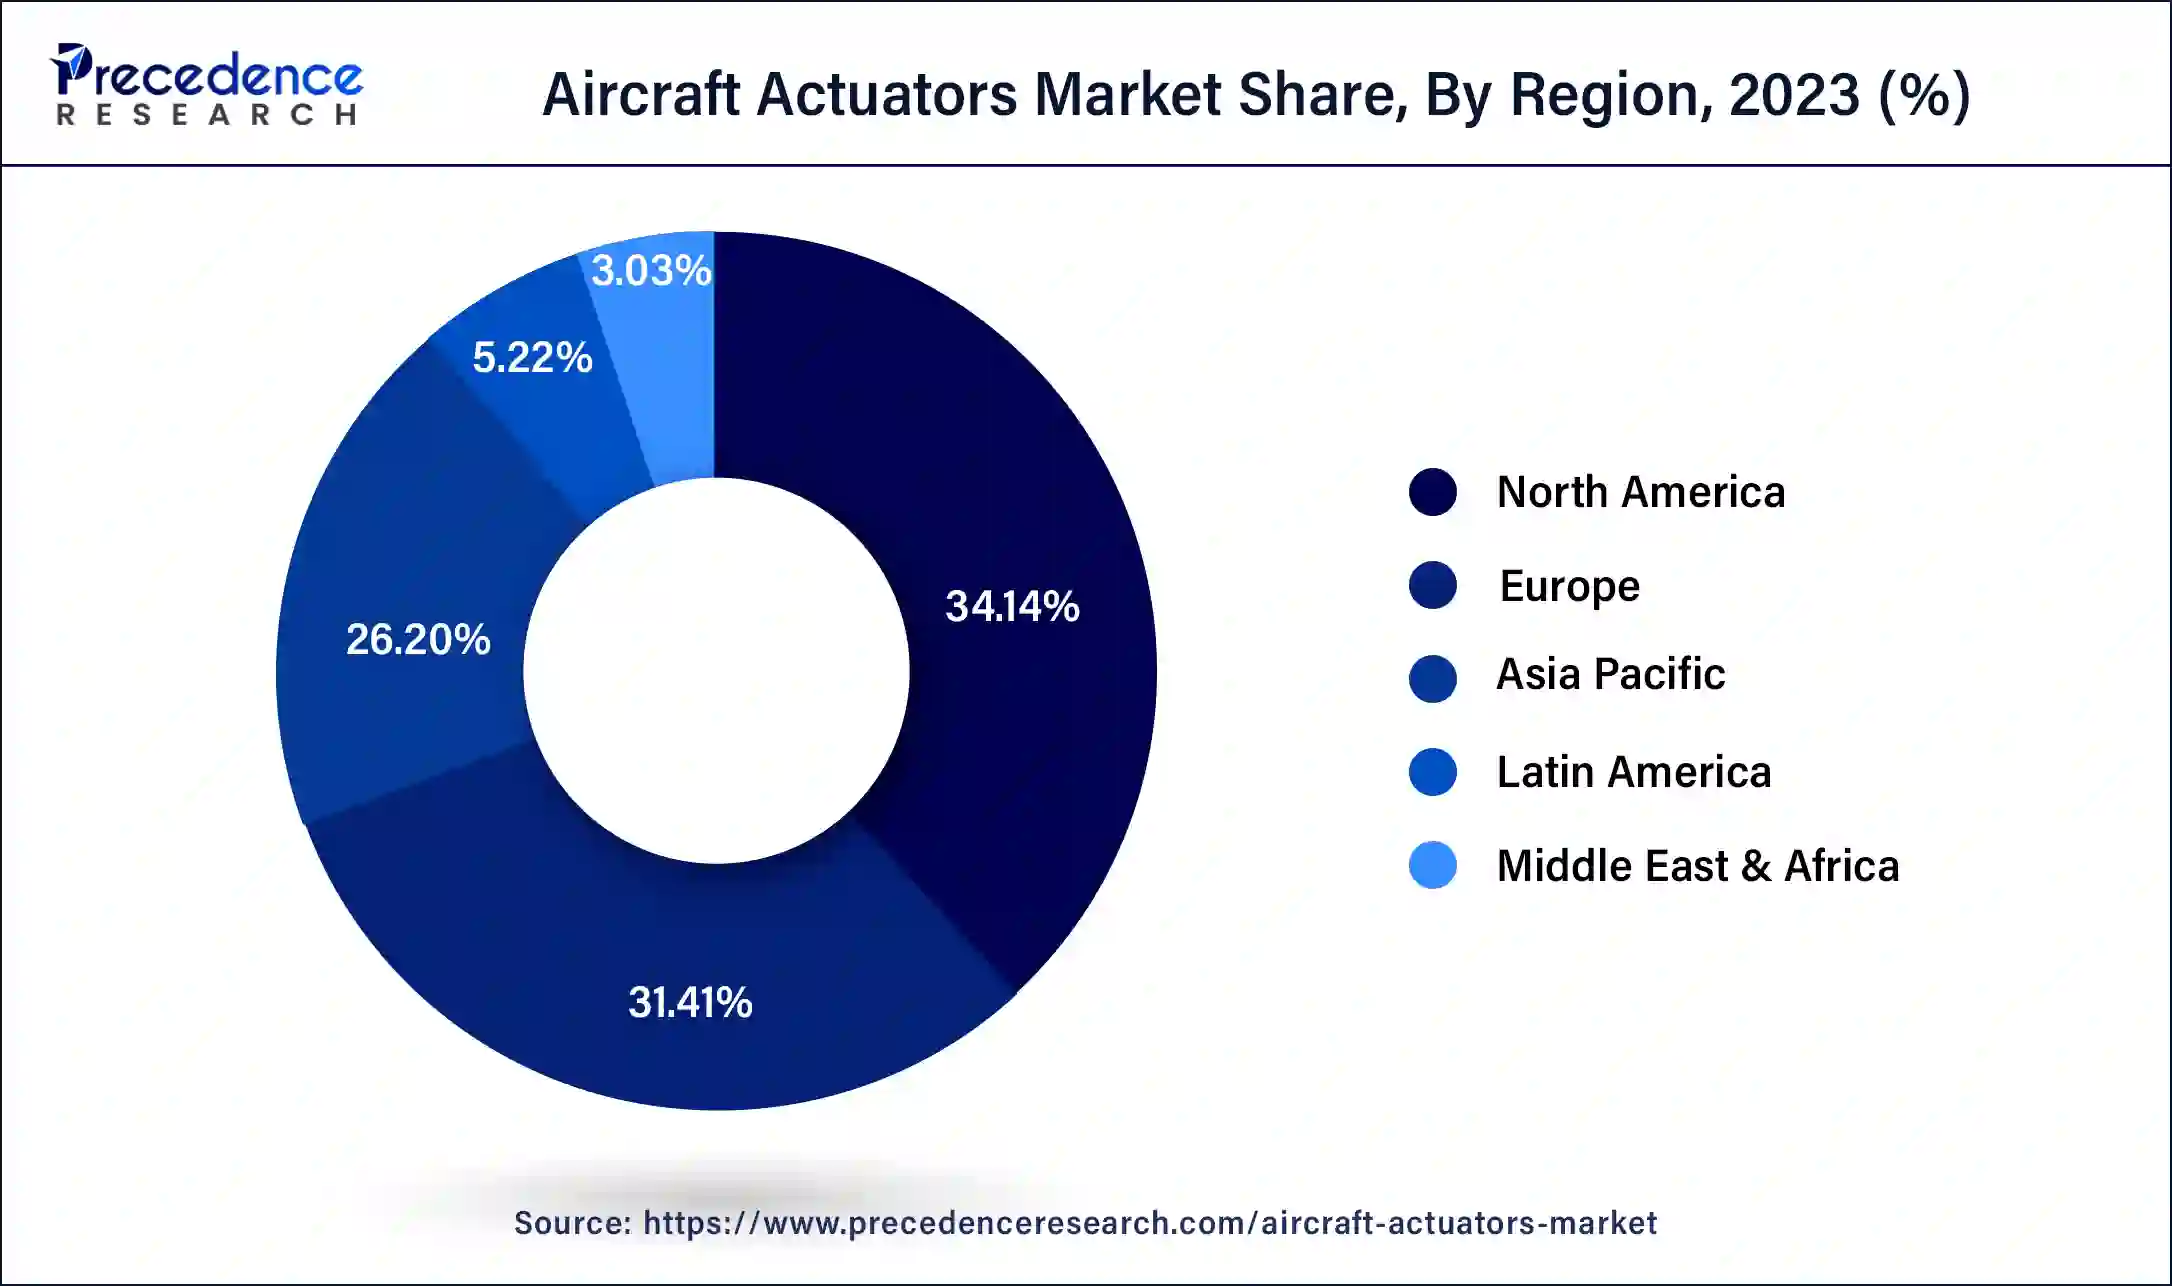 Aircraft Actuators Market Share, By Region, 2023 (%)